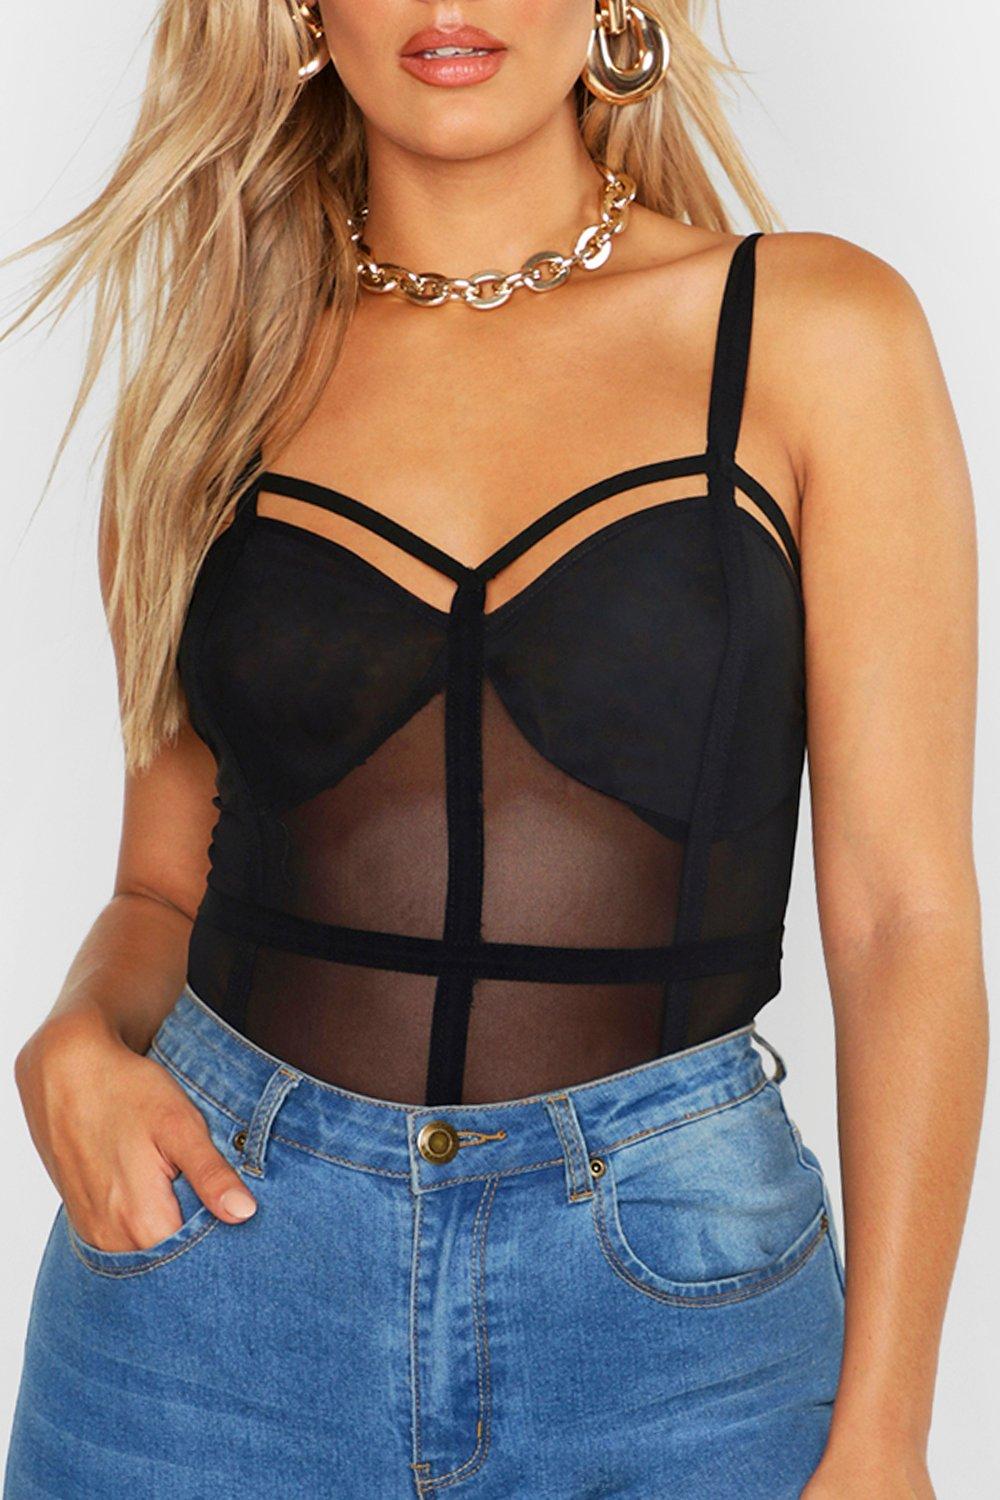 Frequency Strappy Mesh And Jersey Bodysuit - Black